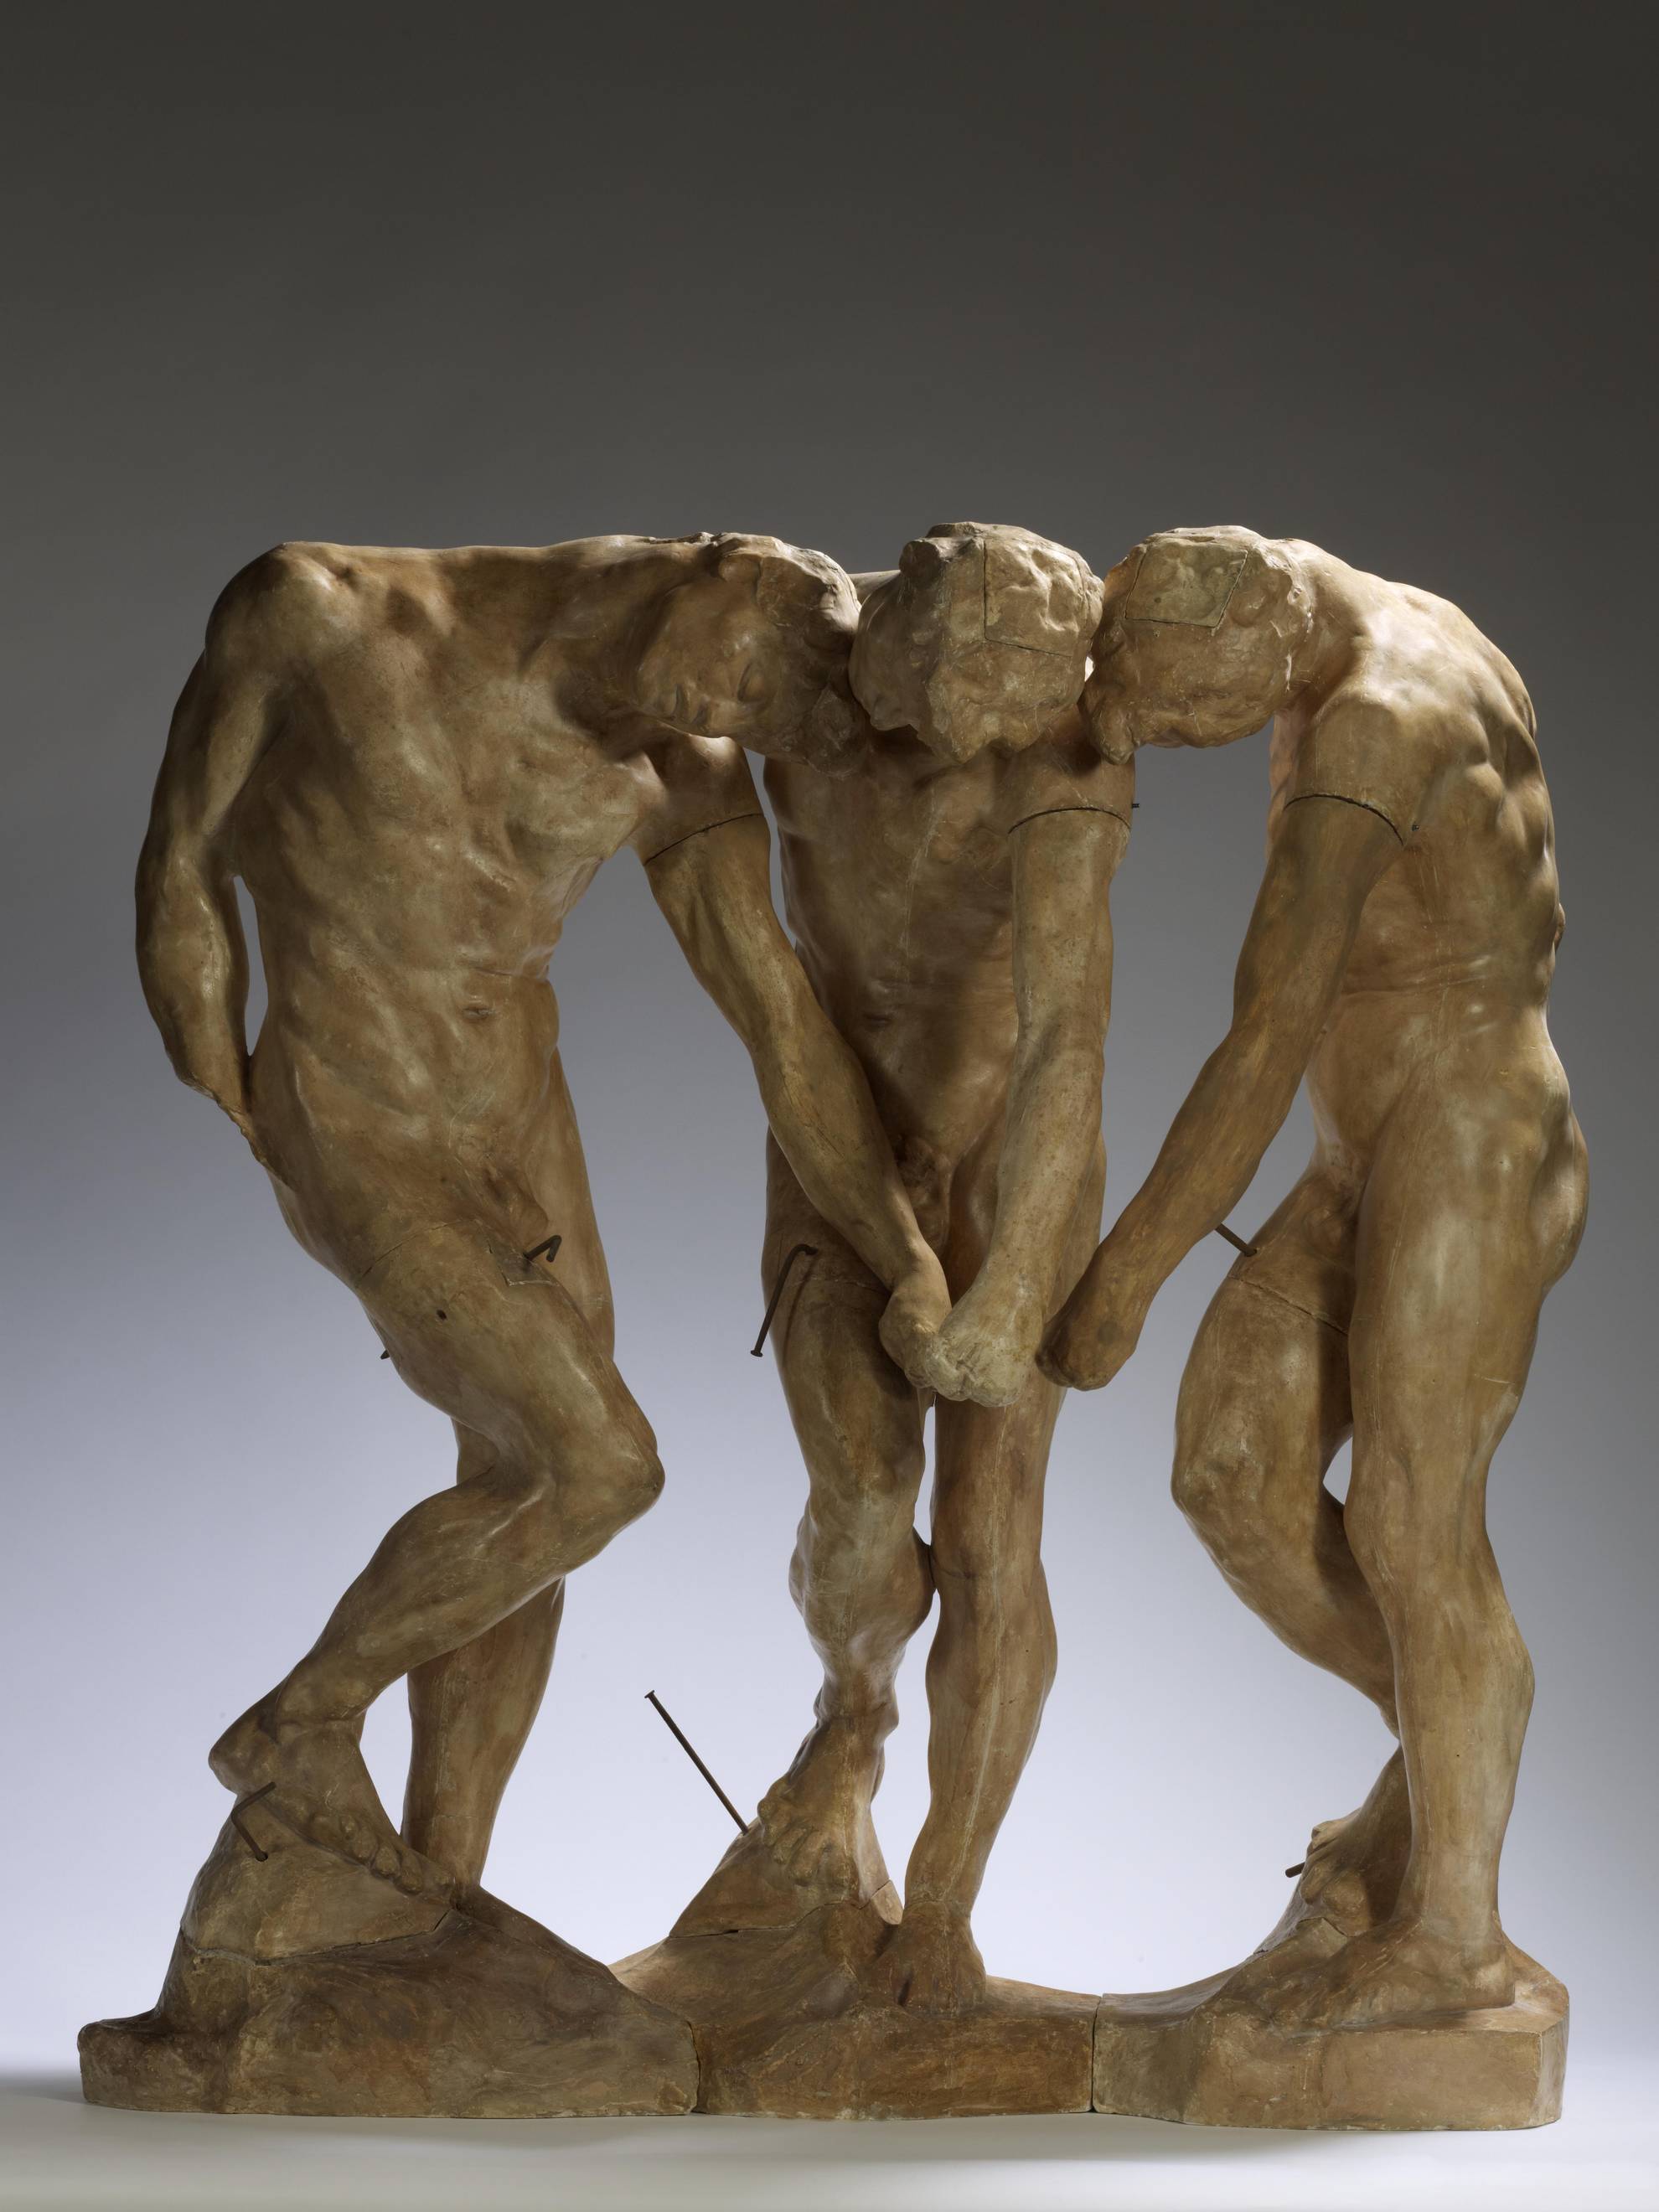 Auguste Rodin's The Three Shadows scultpture, three men join hands and bend slightly inwards towards each other